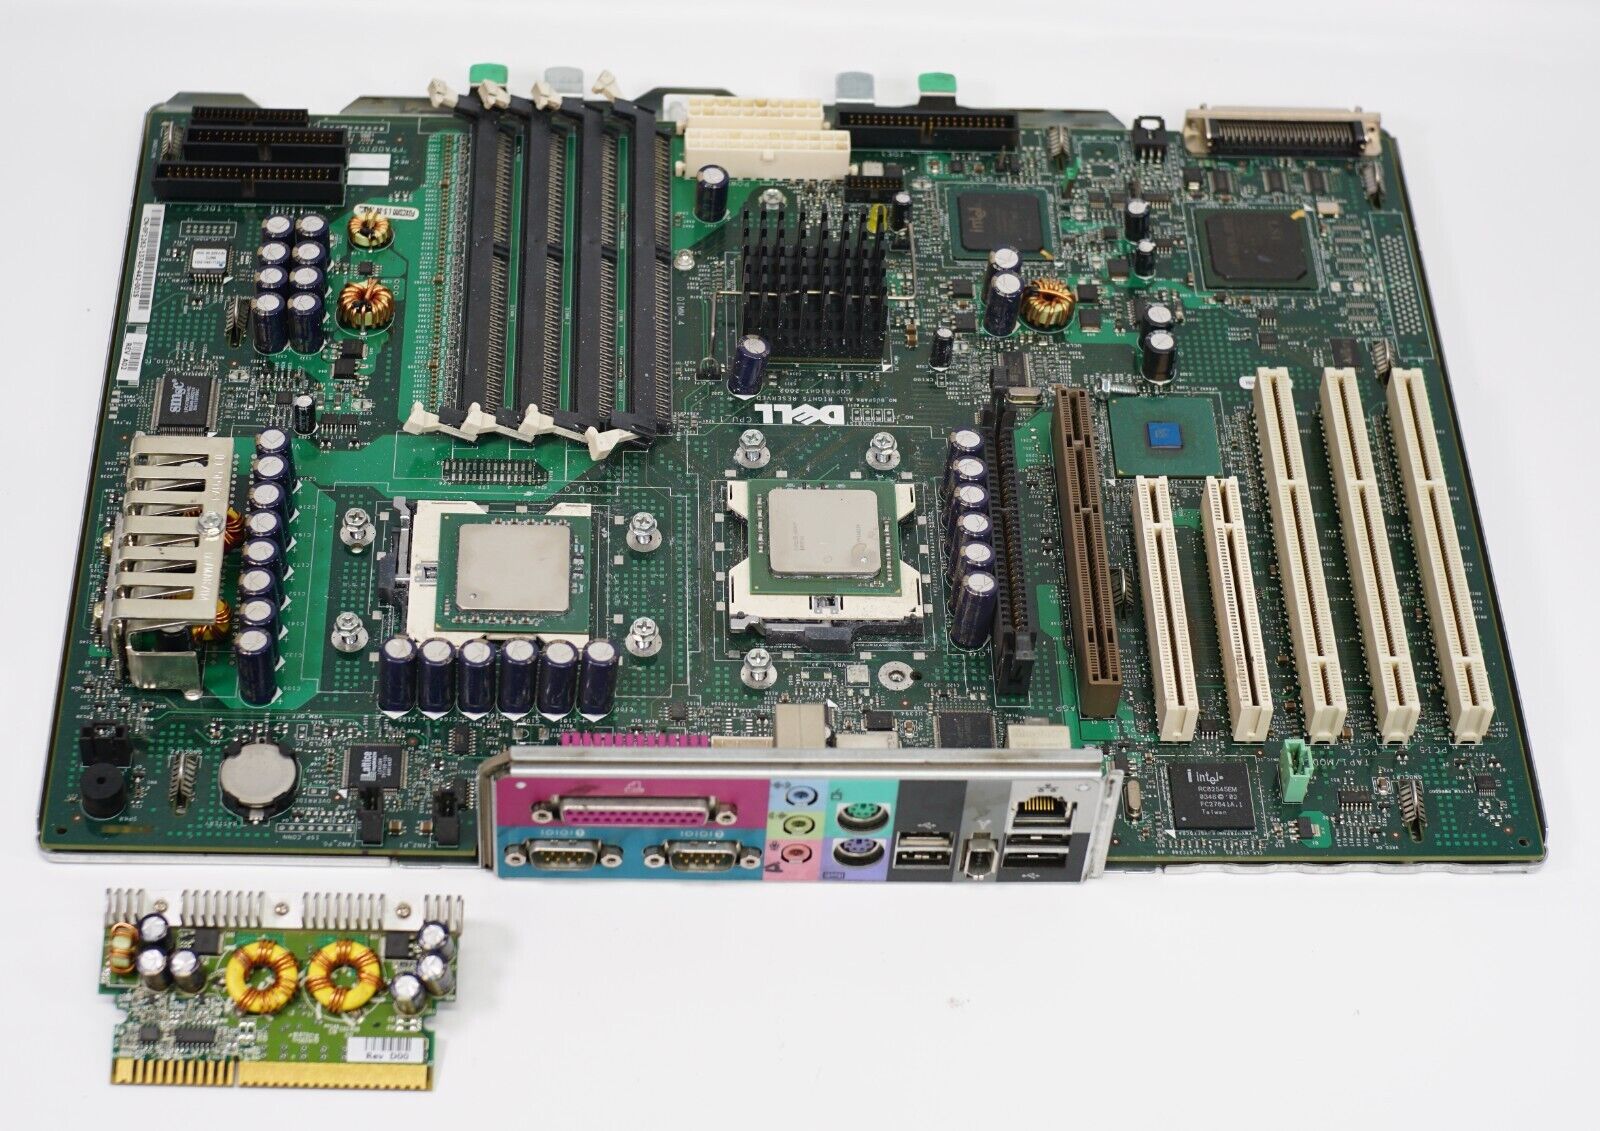 Dell Precision 650 Workstation Motherboard - Dual CPU Socket